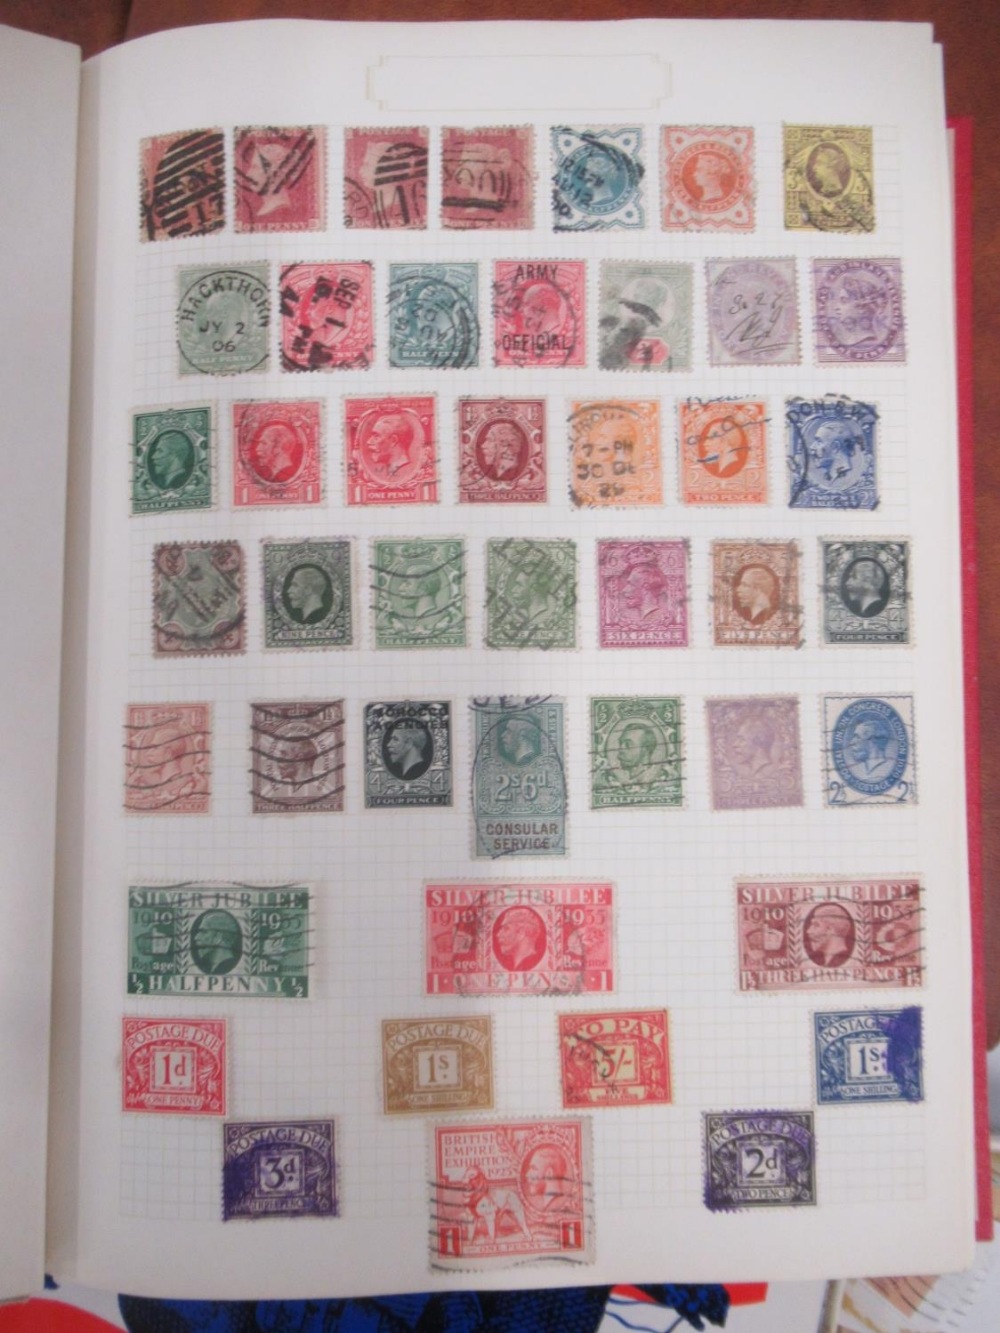 Red The Derwent Stamp Album cont. 4 used penny reds, GB & mixed International stamps, blue The - Image 2 of 11